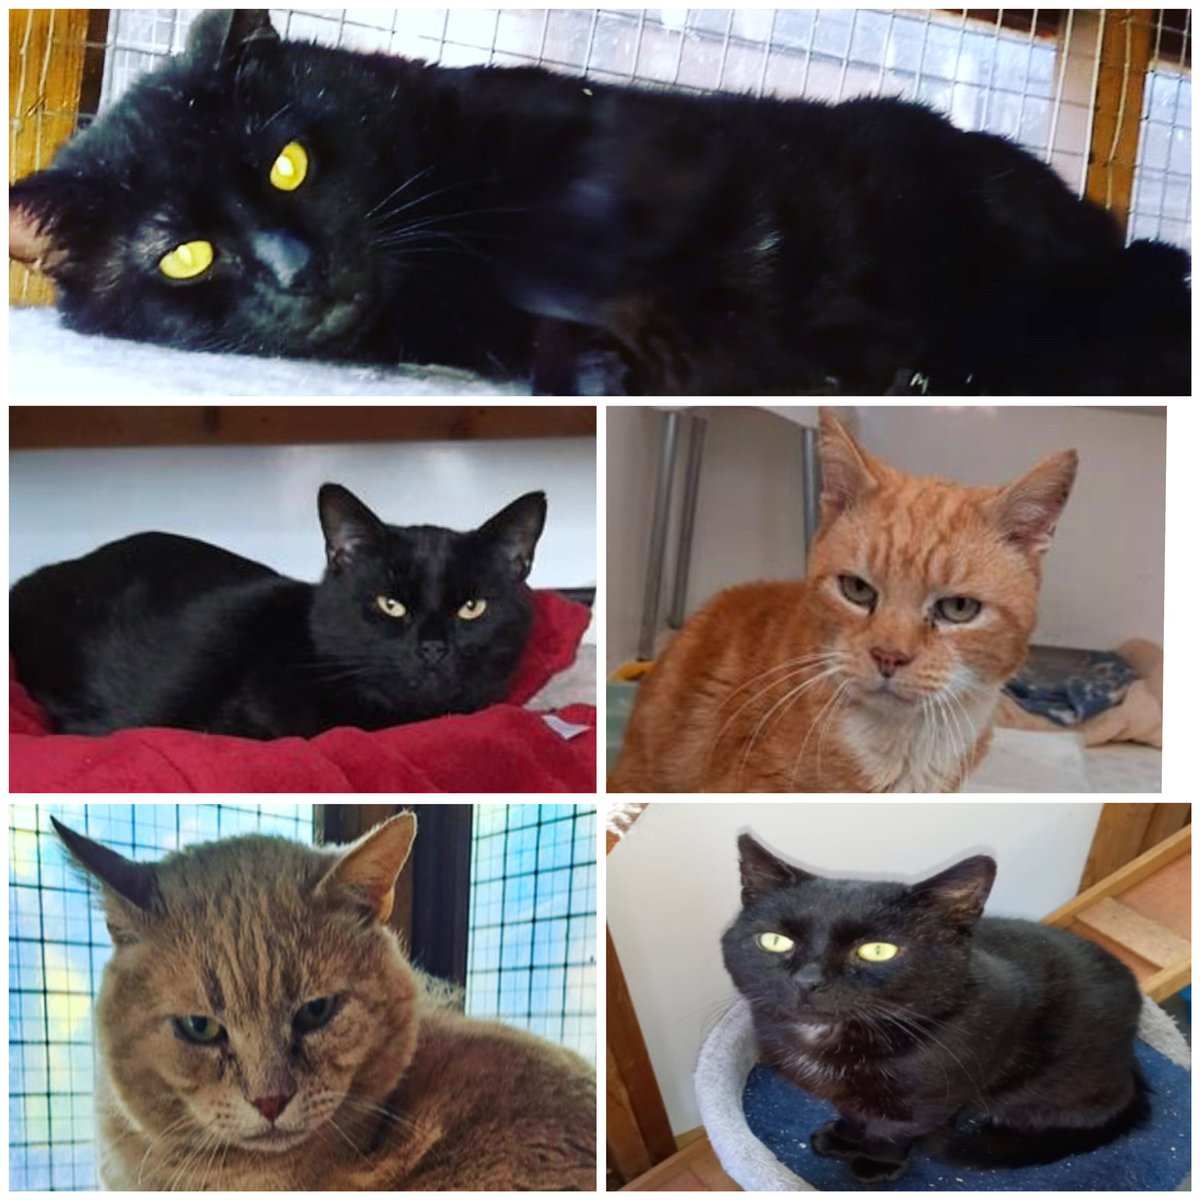 5 beautiful boys, all long-term strays, 2 with #FIV, now safe & looking for homes. Please #Neuter and #Vaccinate your #cats, as they all deserve loving, safe homes. Find out more about these boys >> rb.gy/tkojk #AdoptDontShop #CatsProtection